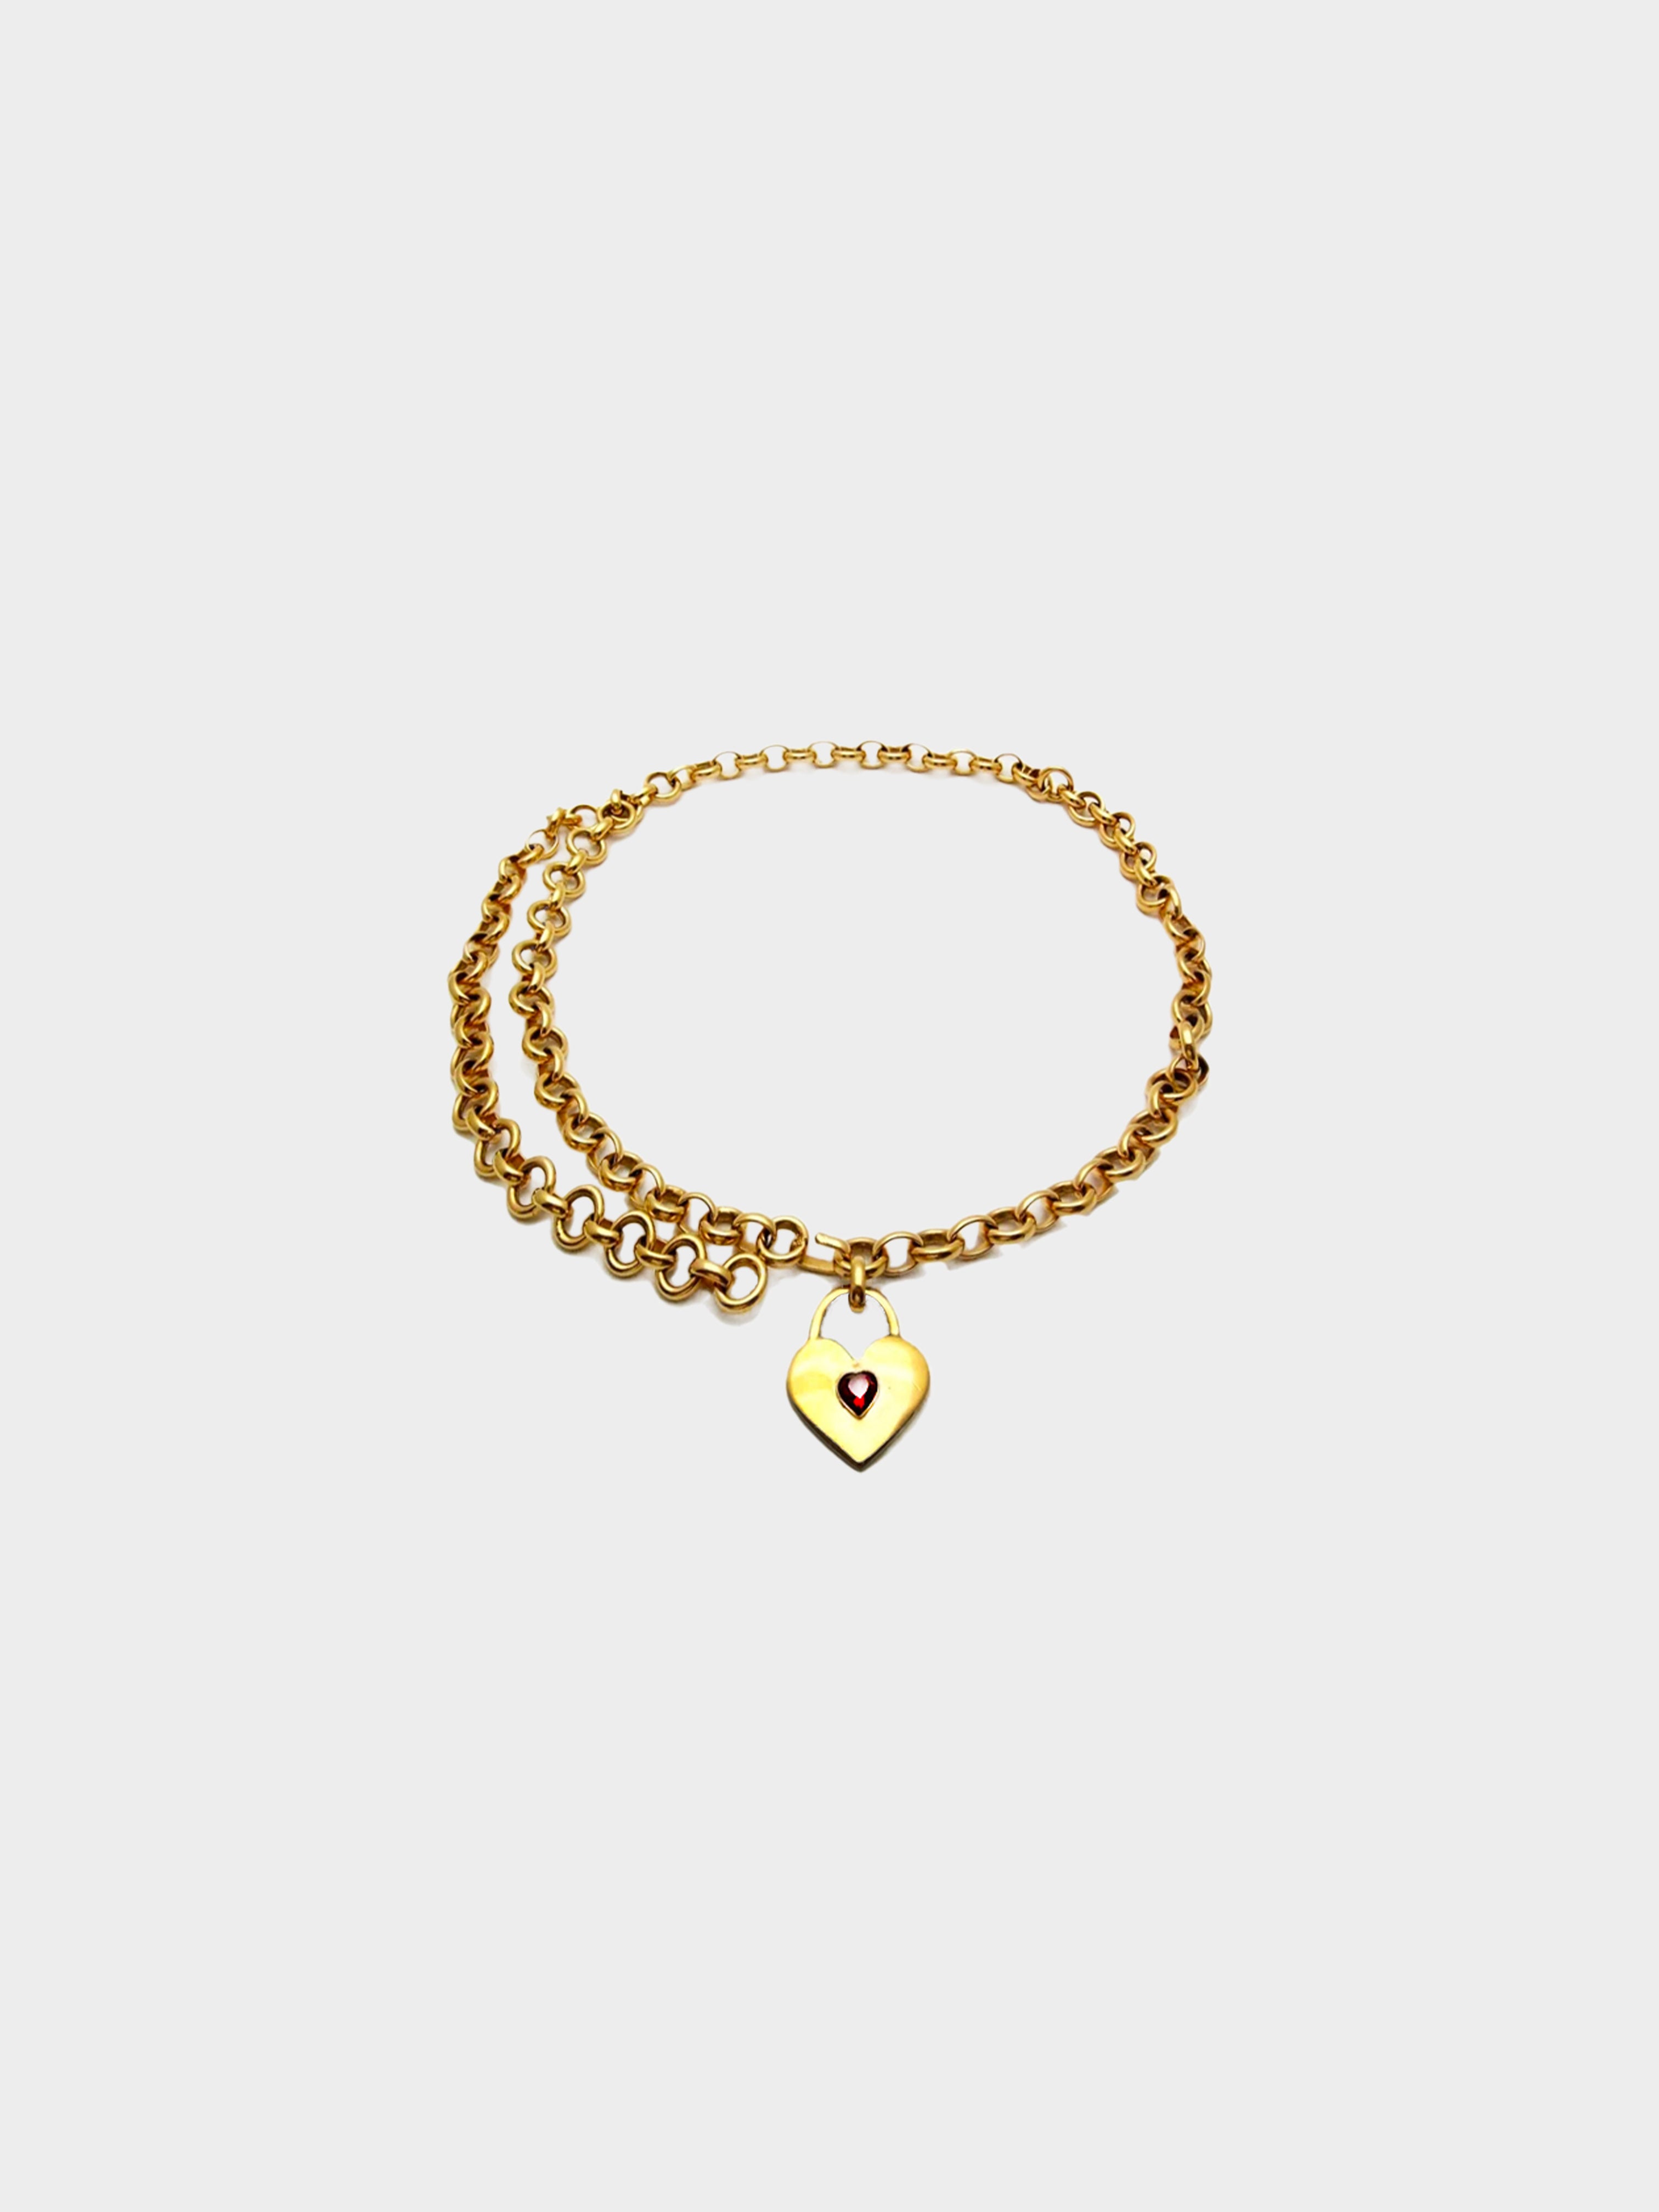 Chanel 1970s Gold Heart Pendant Chain Link Necklace